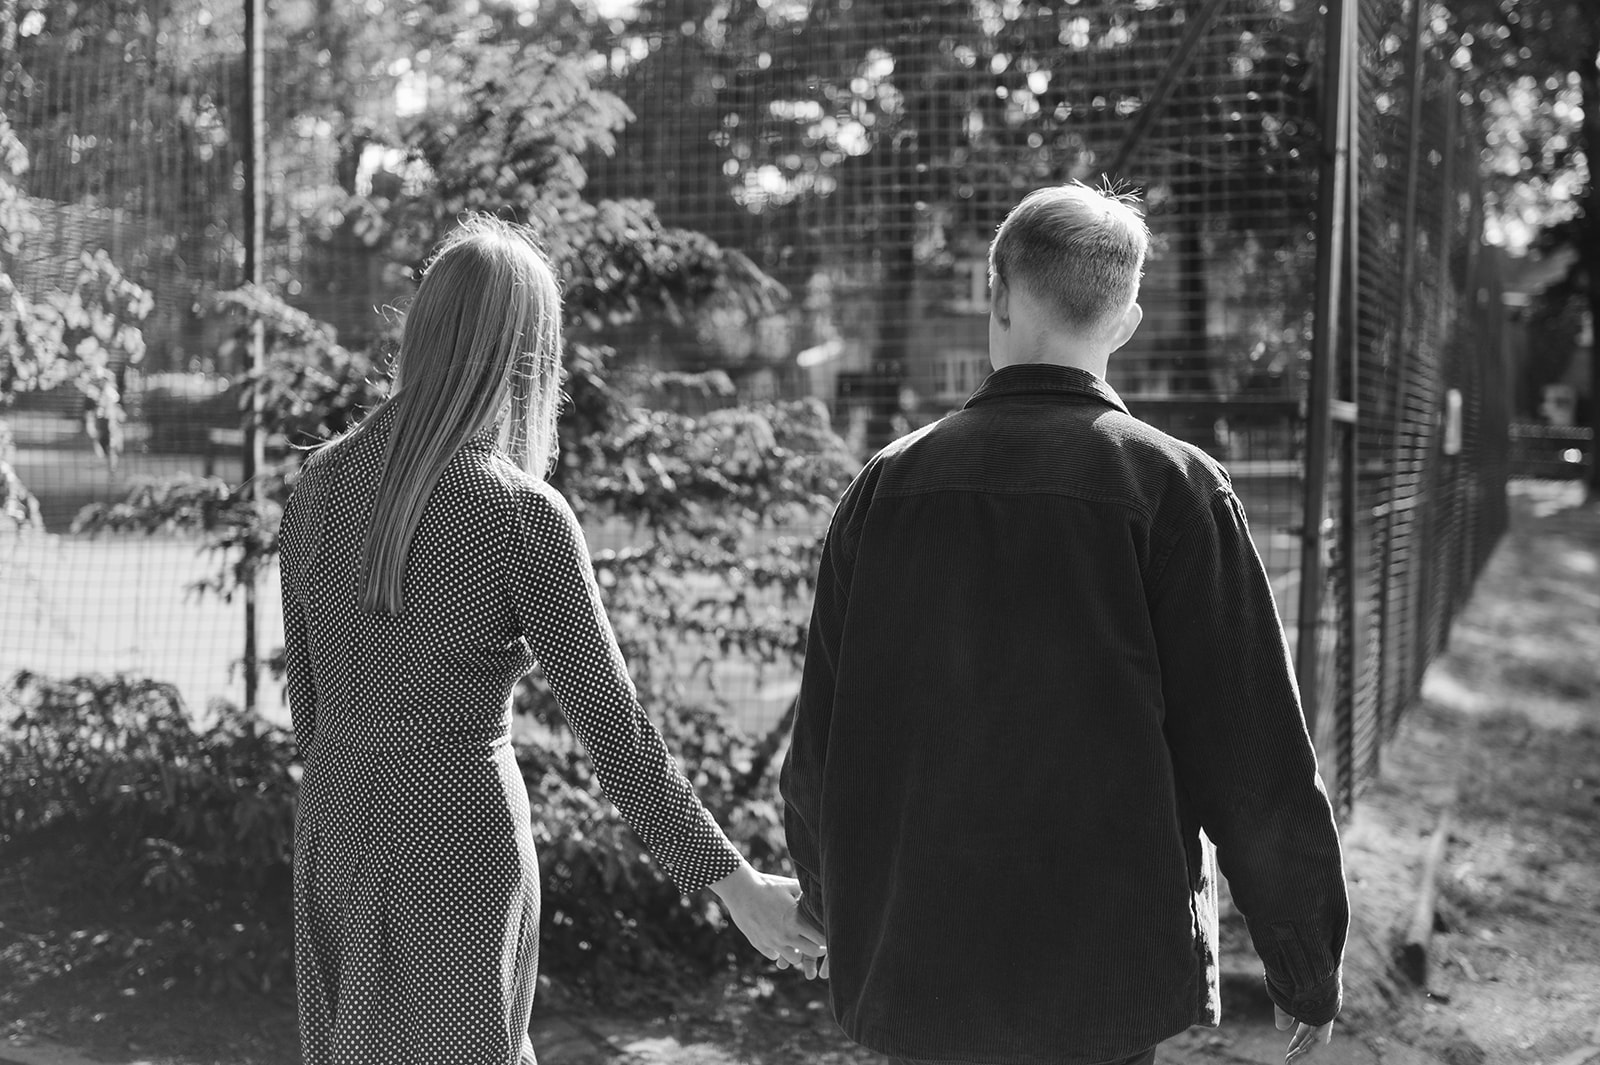 relaxed engagement photos in Bournville Birmingham